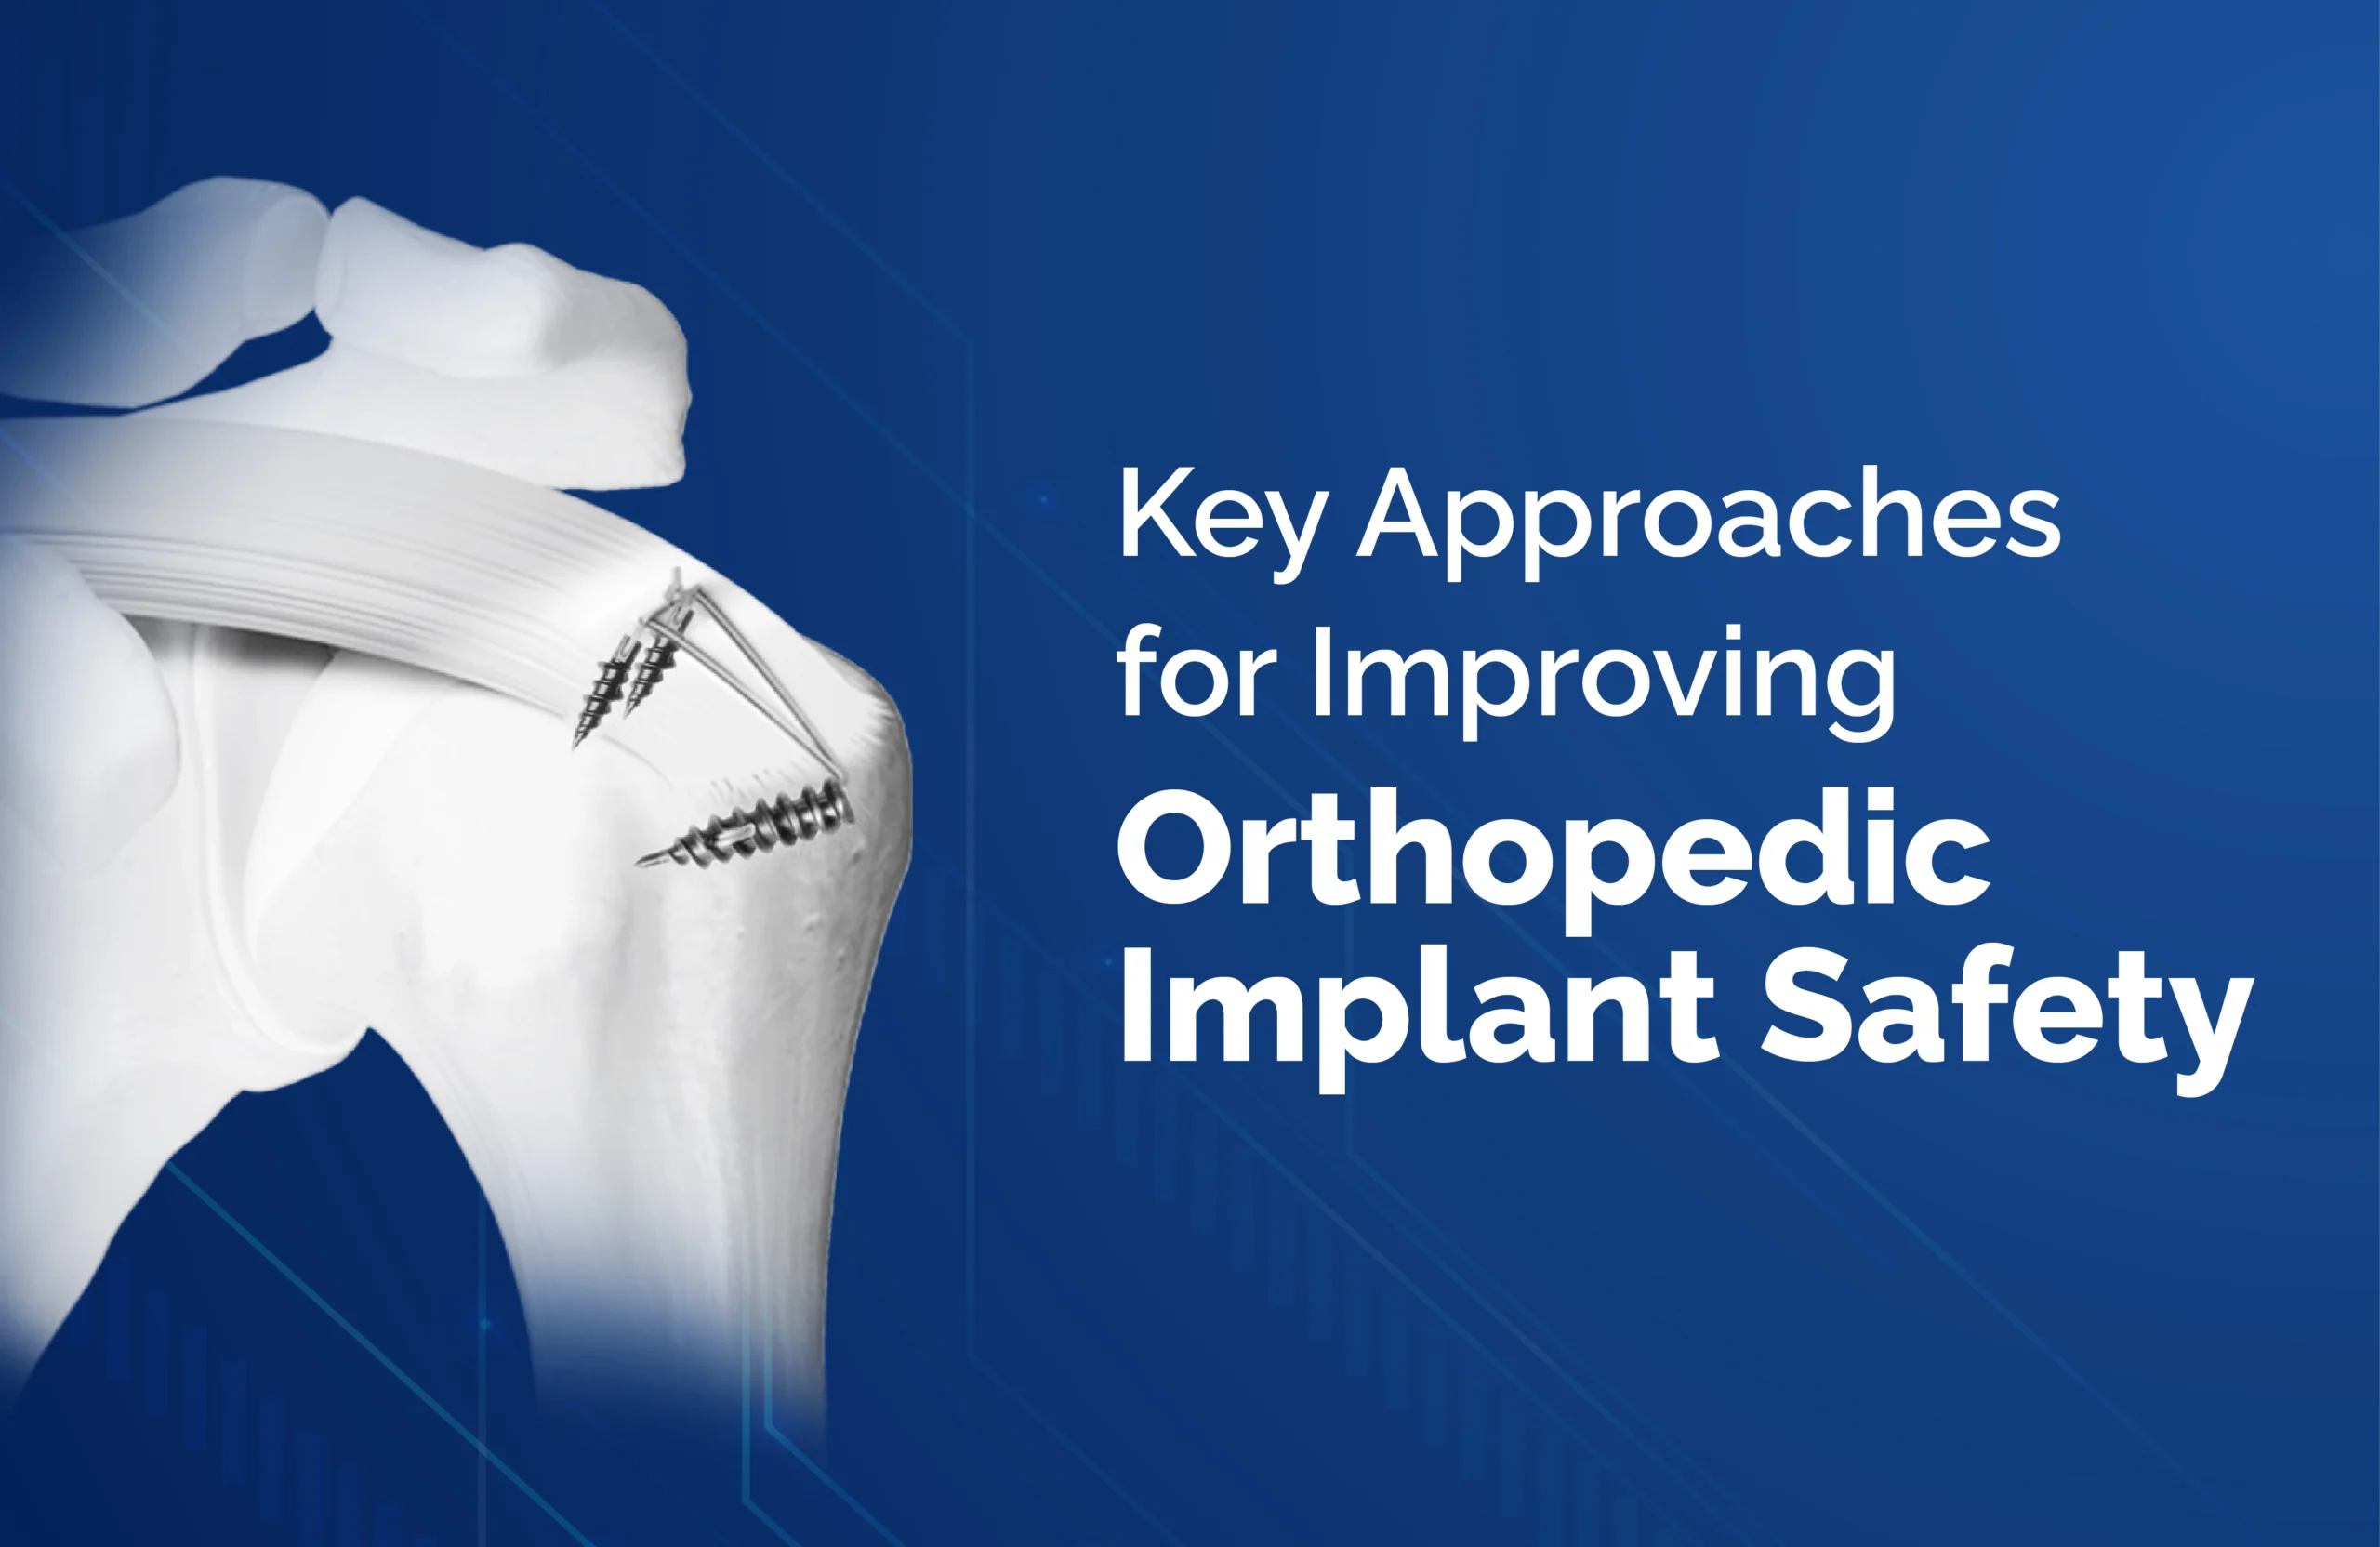 Key Approaches for Improving Orthopedic Implant Safety